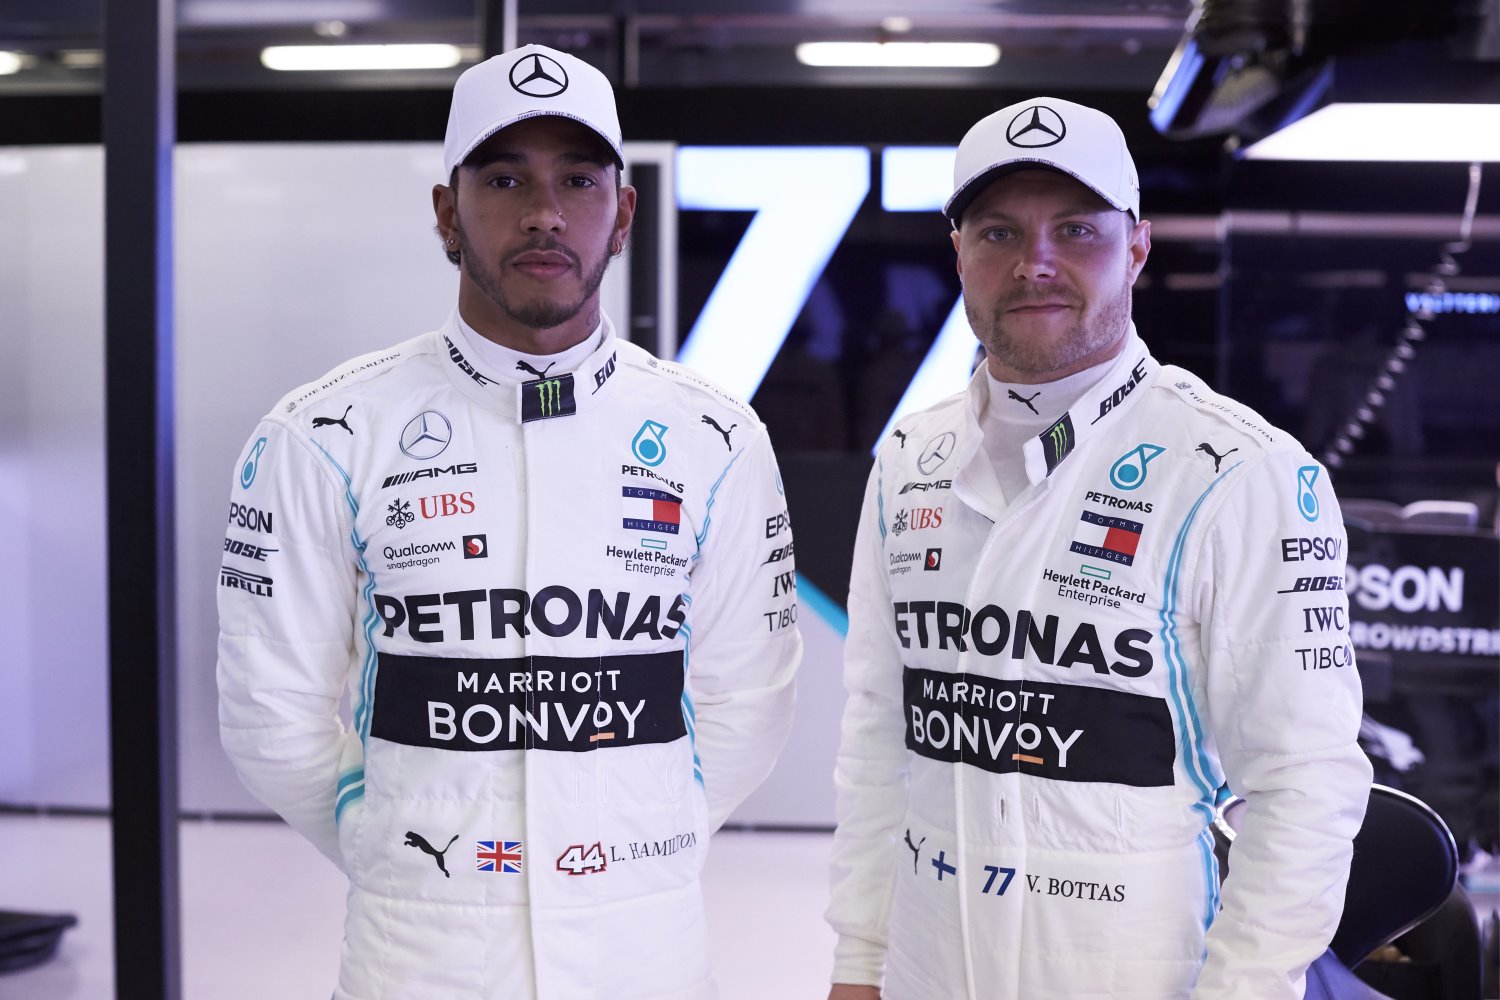 Hamilton and Bottas relax in the garage as the other drivers try in vain to beat their times